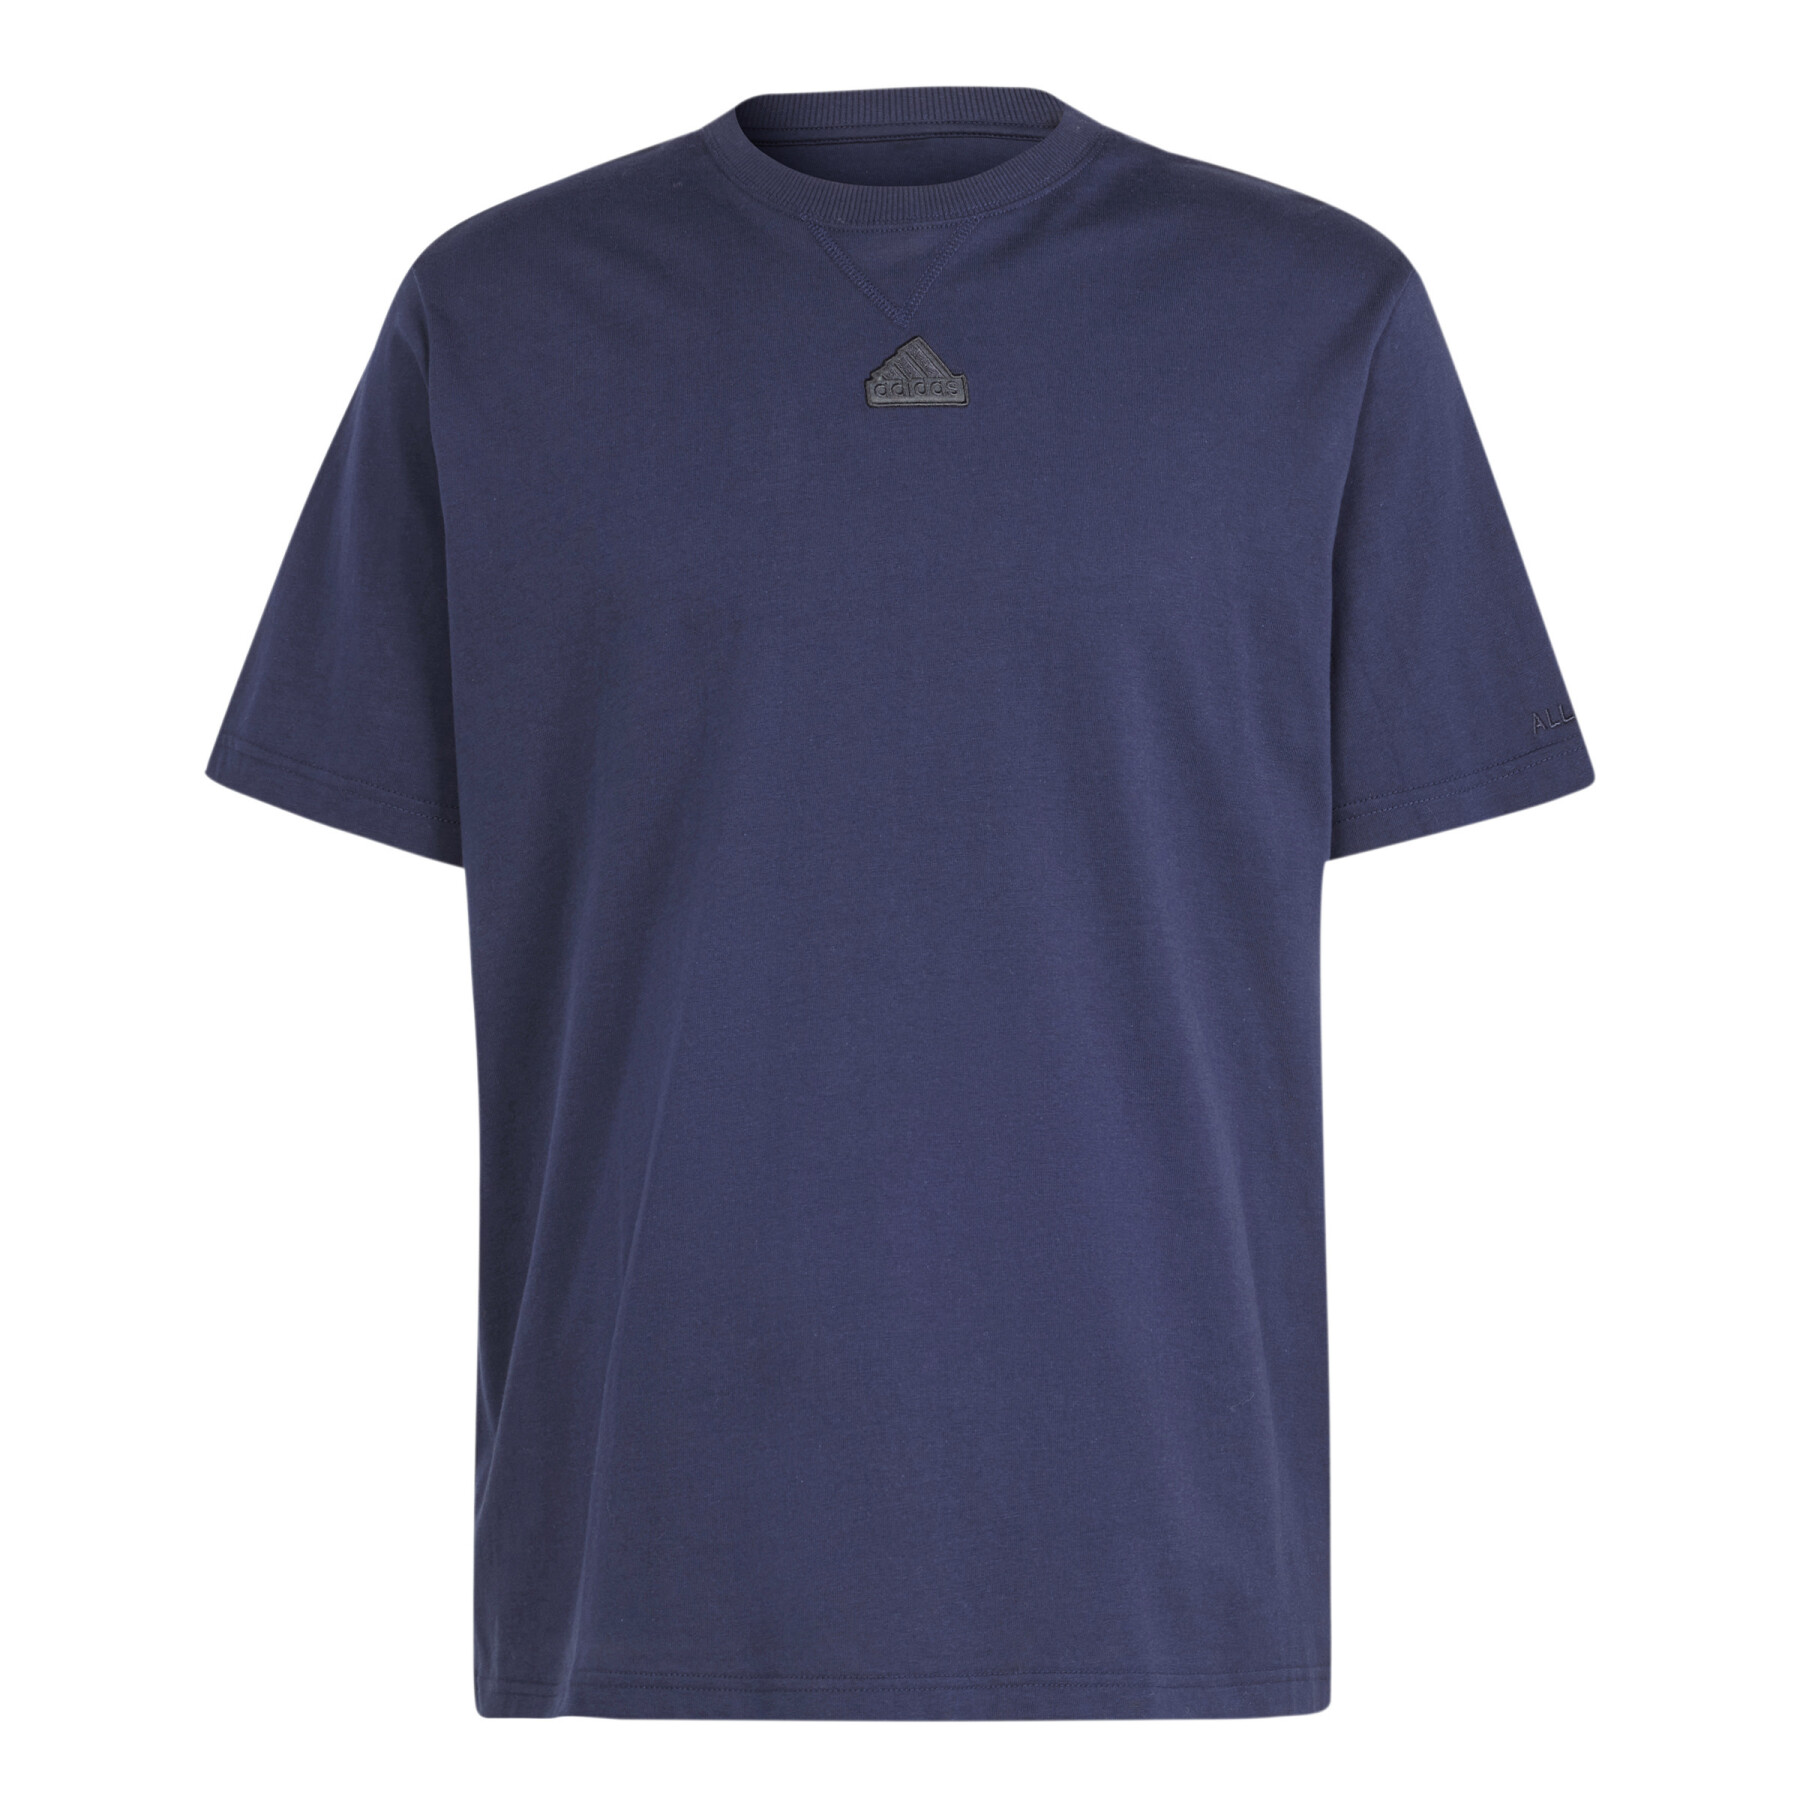 T-Shirt adidas ALL SZN Graphic